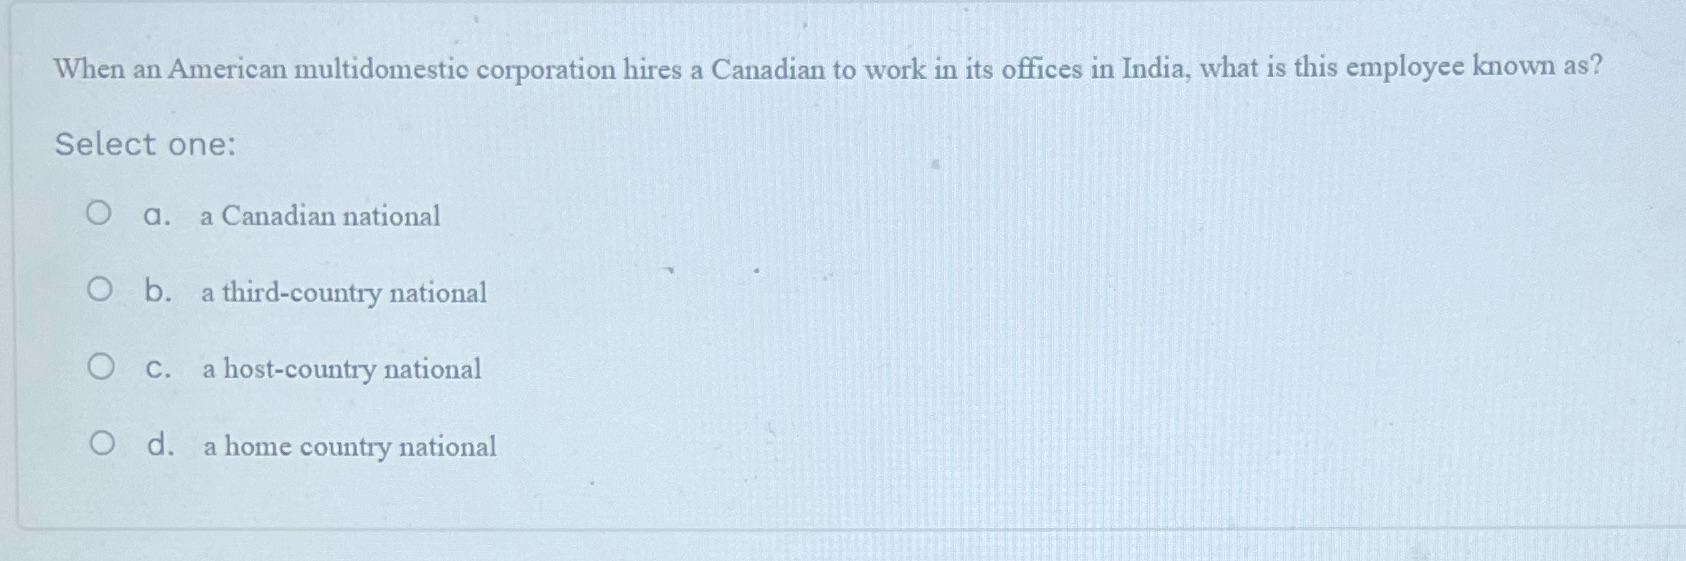 When an American multidomestic corporation hires a Canadian to work in its offices in India, what is this